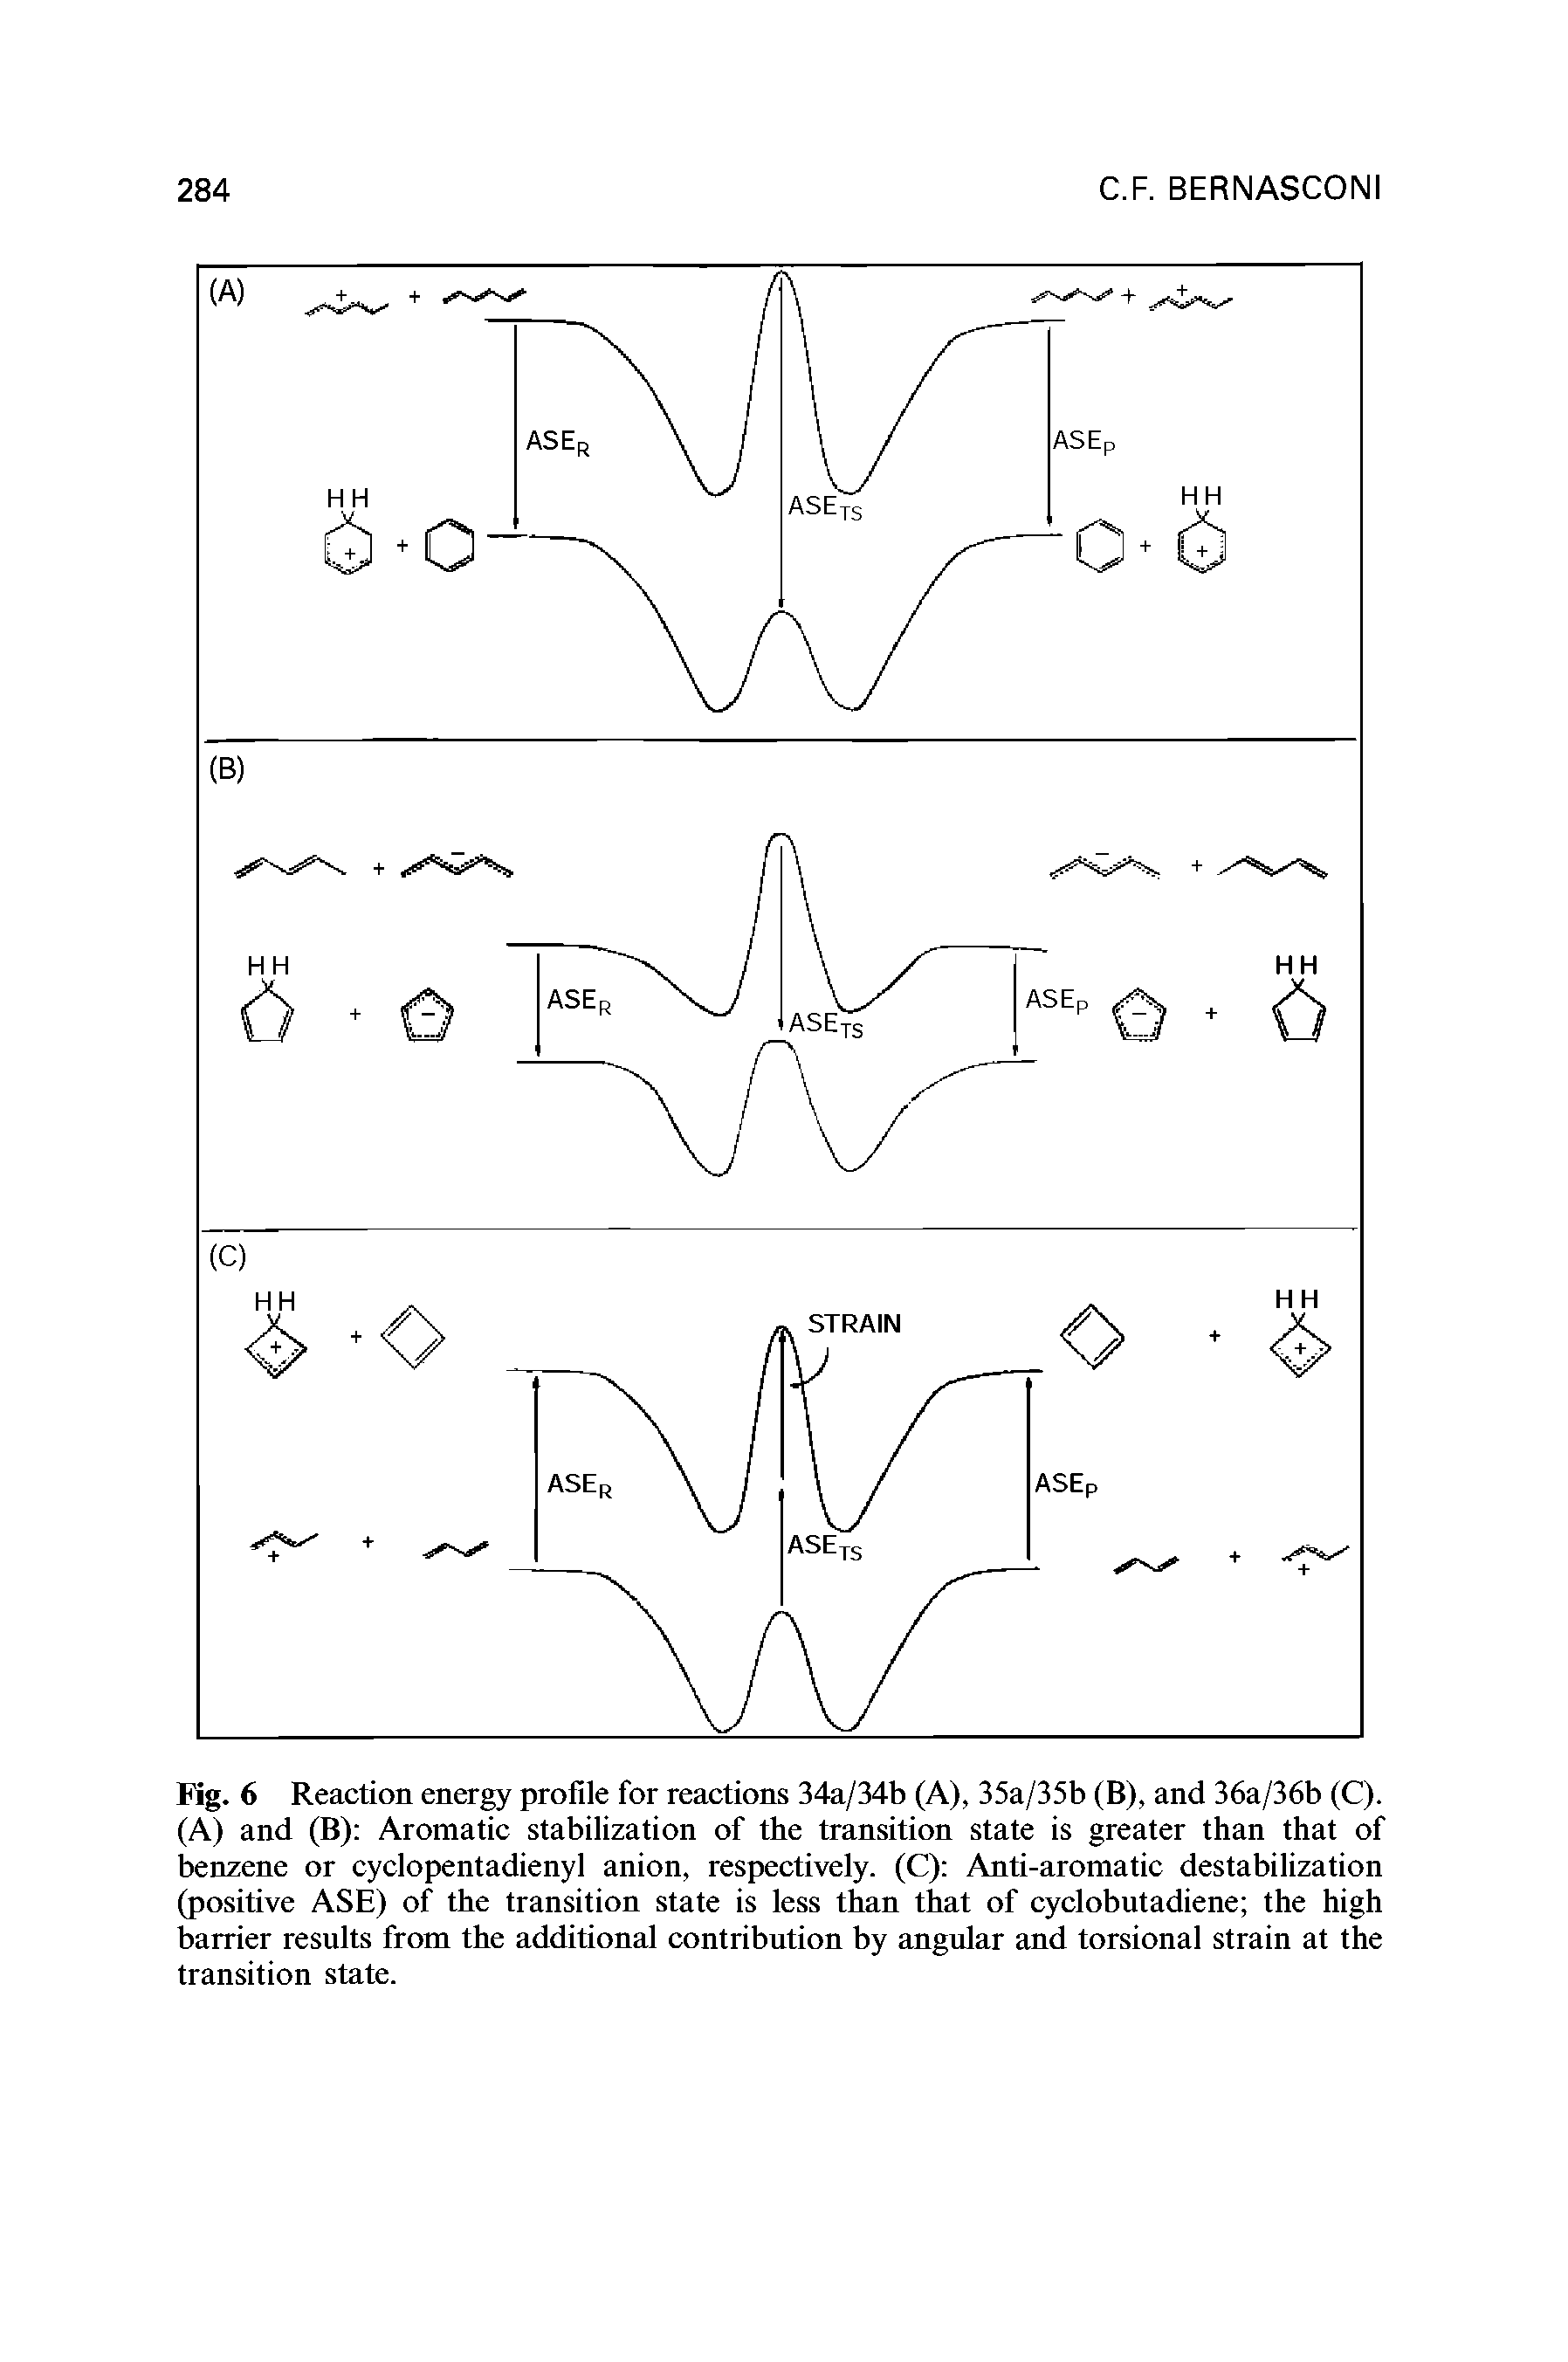 Fig. 6 Reaction energy profile for reactions 34a/34b (A), 35a/35b (B), and 36a/36b (C). (A) and (B) Aromatic stabilization of the transition state is greater than that of benzene or cyclopentadienyl anion, respectively. (C) Anti-aromatic destabilization (positive ASE) of the transition state is less than that of cyclobutadiene the high barrier results from the additional contribution by angular and torsional strain at the transition state.